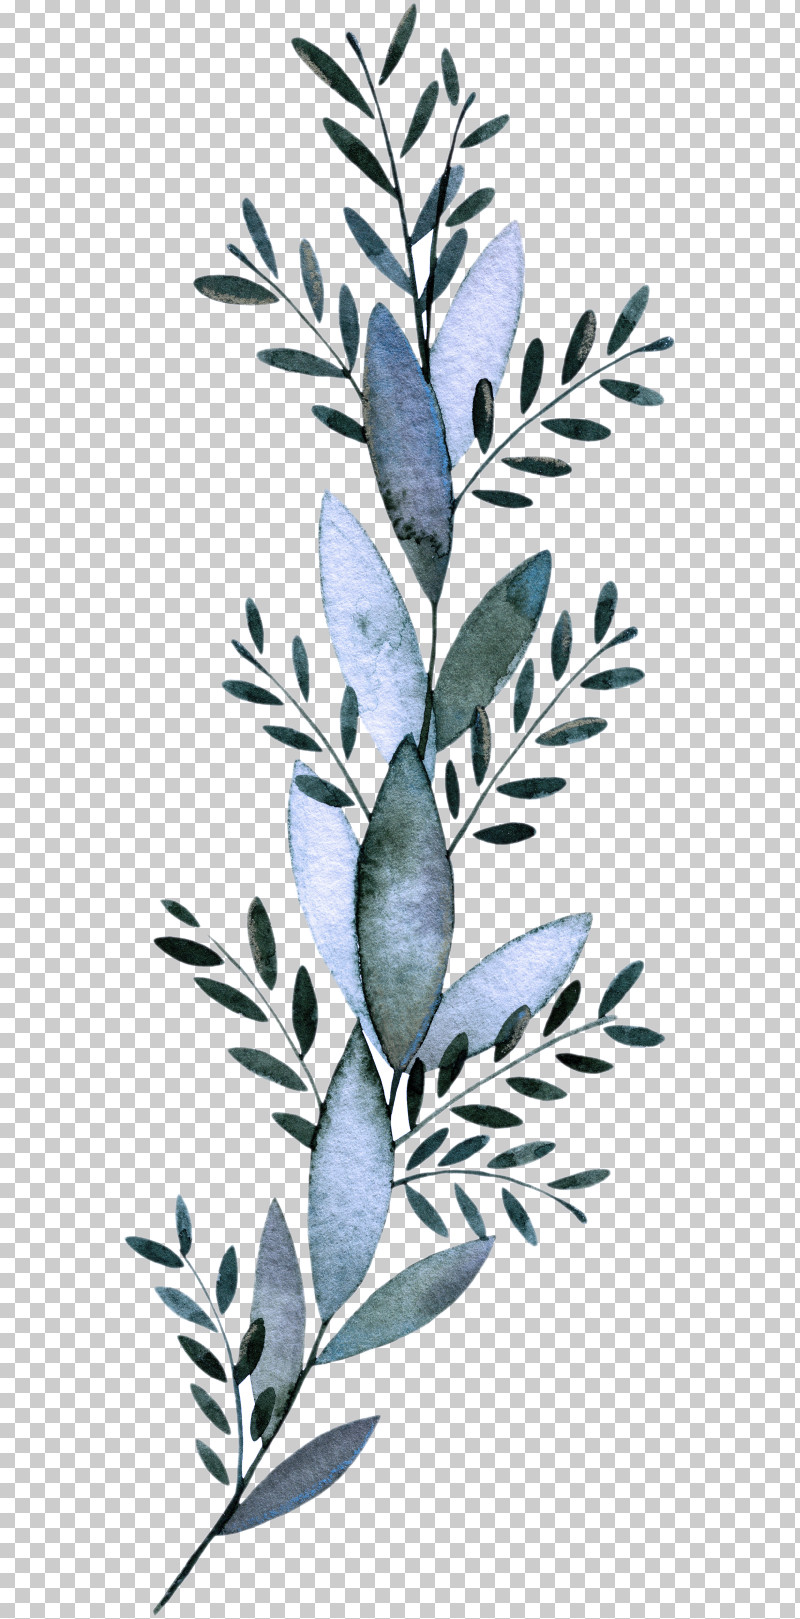 Leaf Plant Stem Twig Tree Black And White PNG, Clipart, Black, Black And White, Flora, Flower, Fruit Free PNG Download